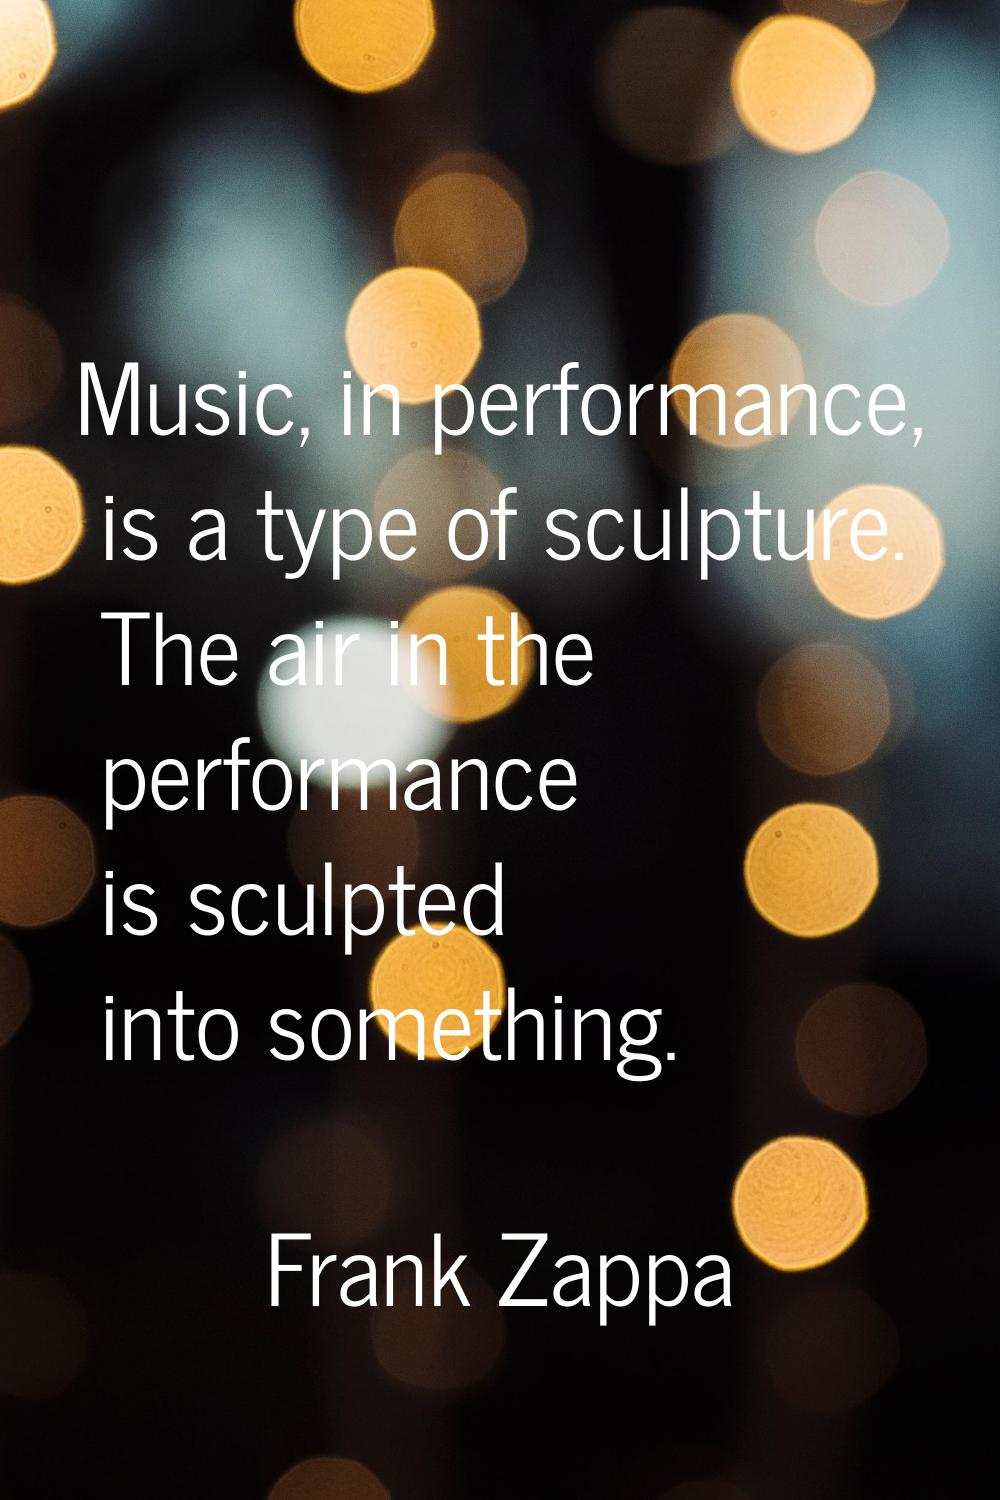 Music, in performance, is a type of sculpture. The air in the performance is sculpted into somethin